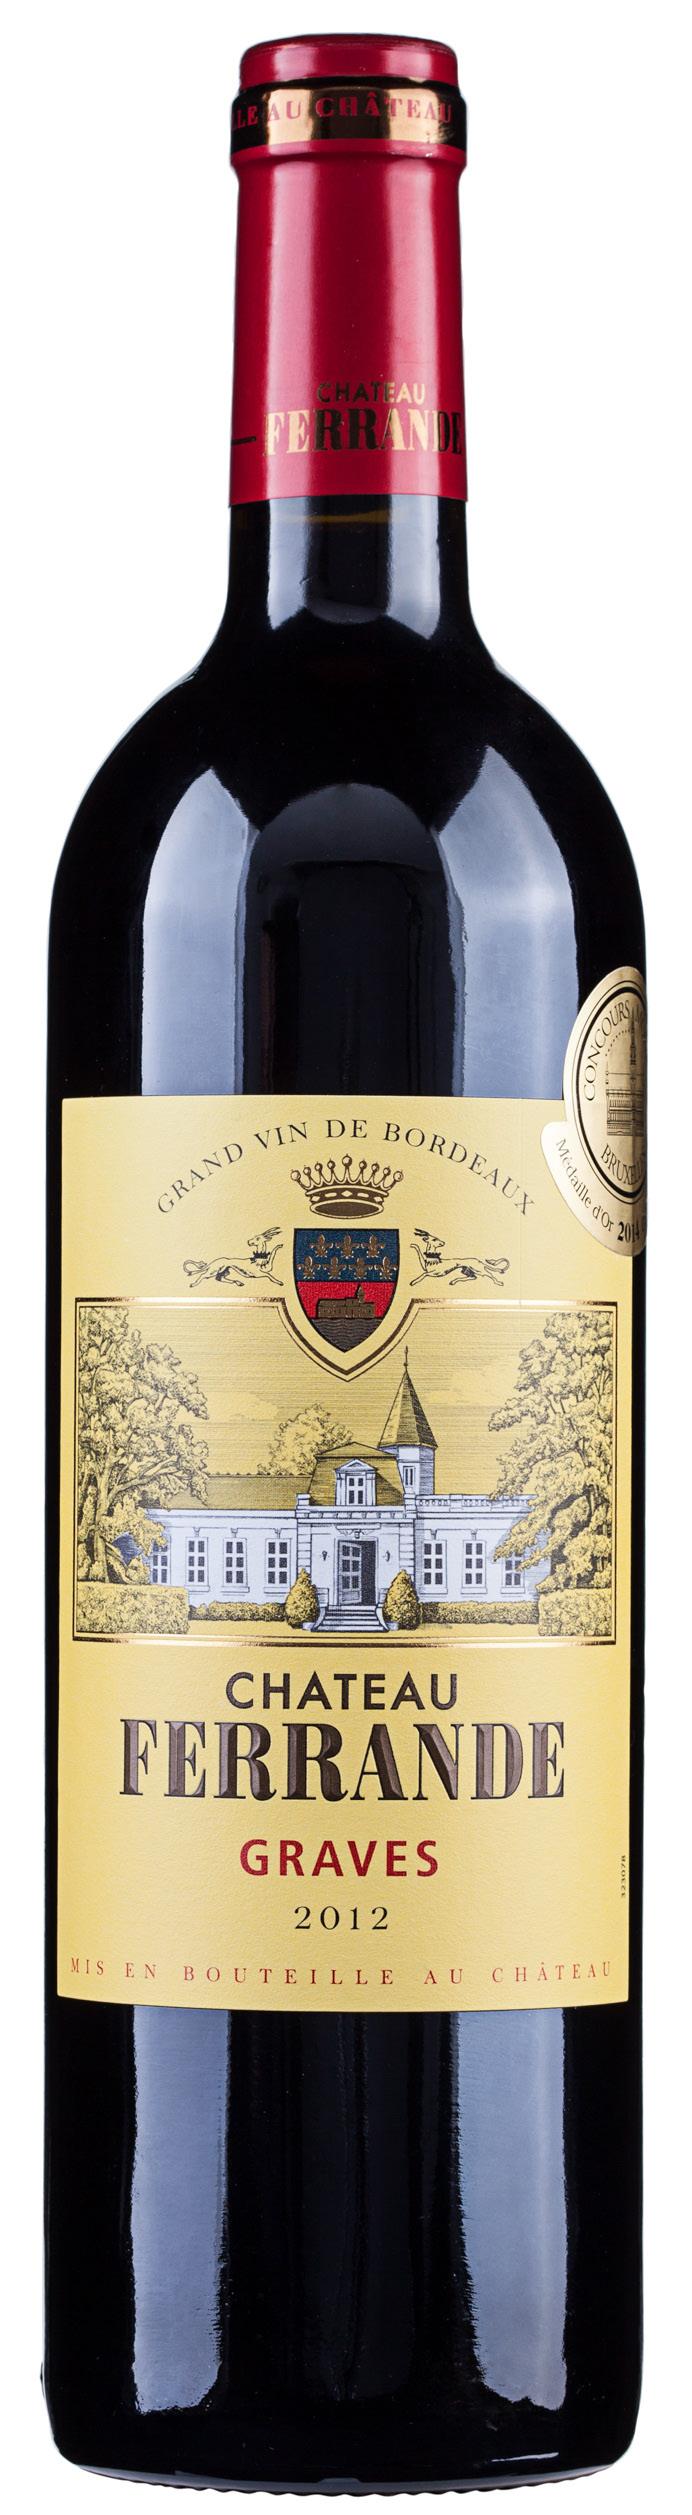 Château Ferrande Graves This red wine originates from france. Harvesting progressed without complications For Merlots, vinification focused on fruitiness, using reductive techniques.